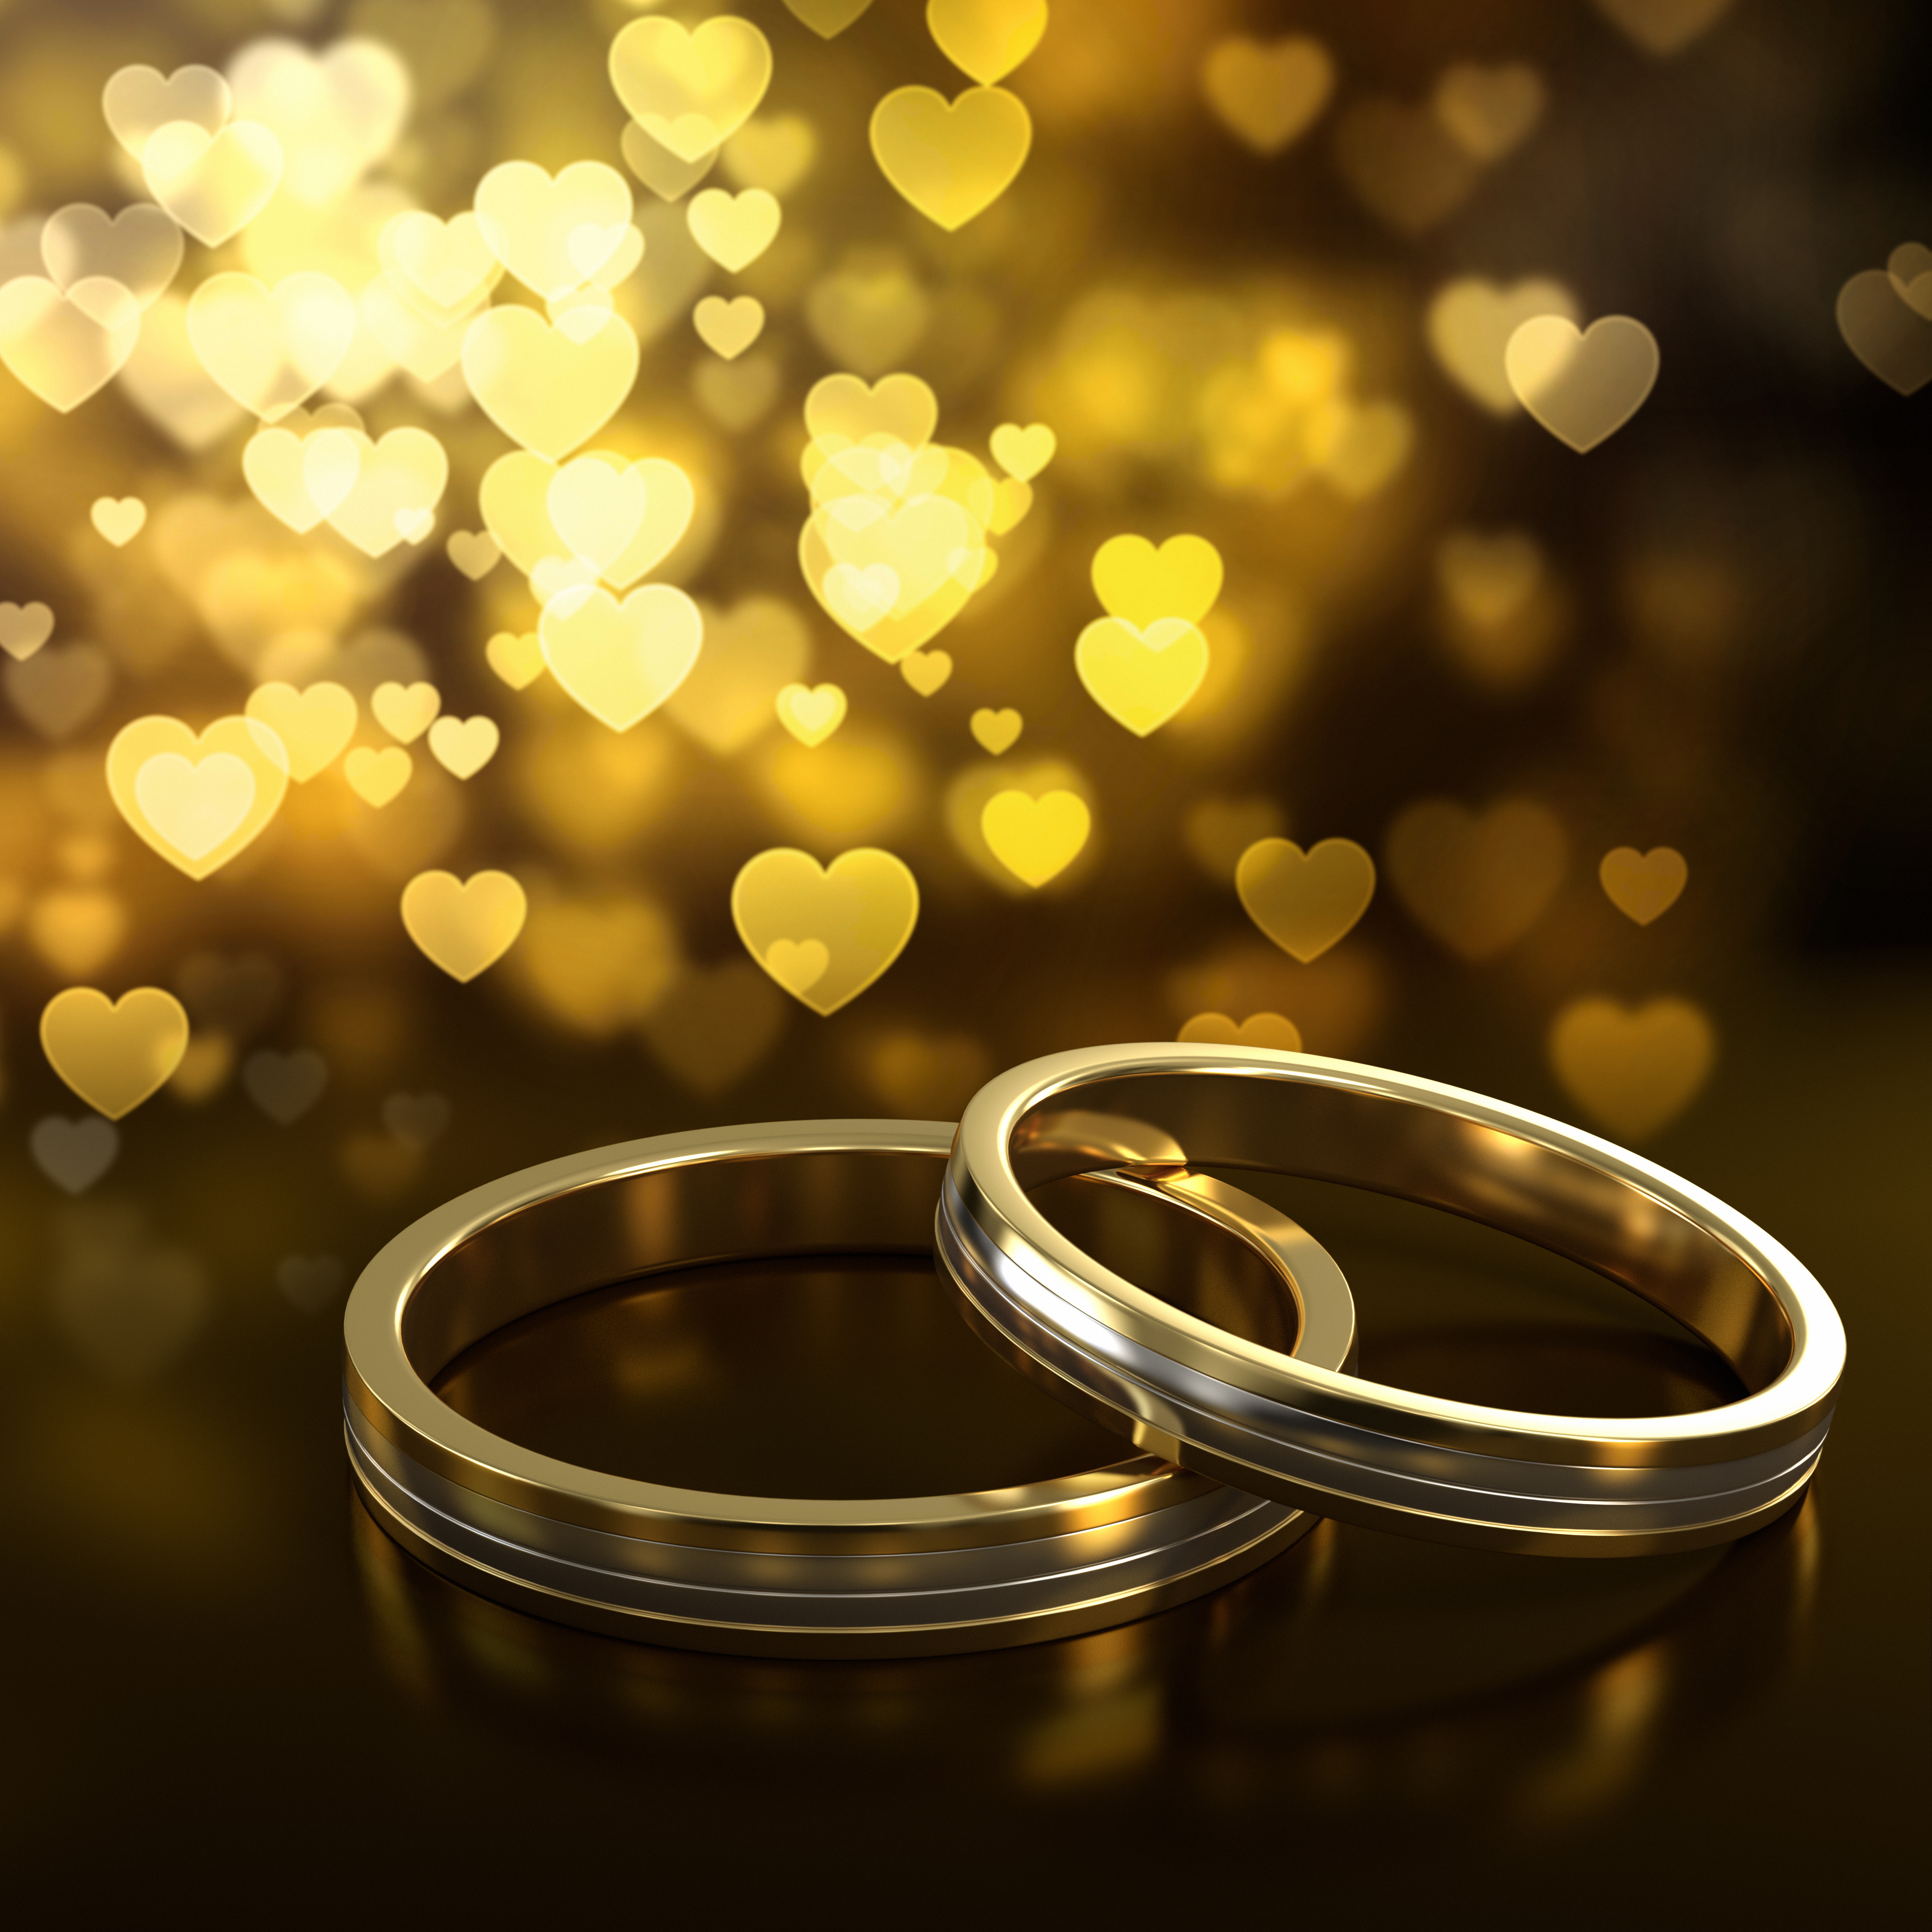 Two golden wedding rings with heart bokeh on background